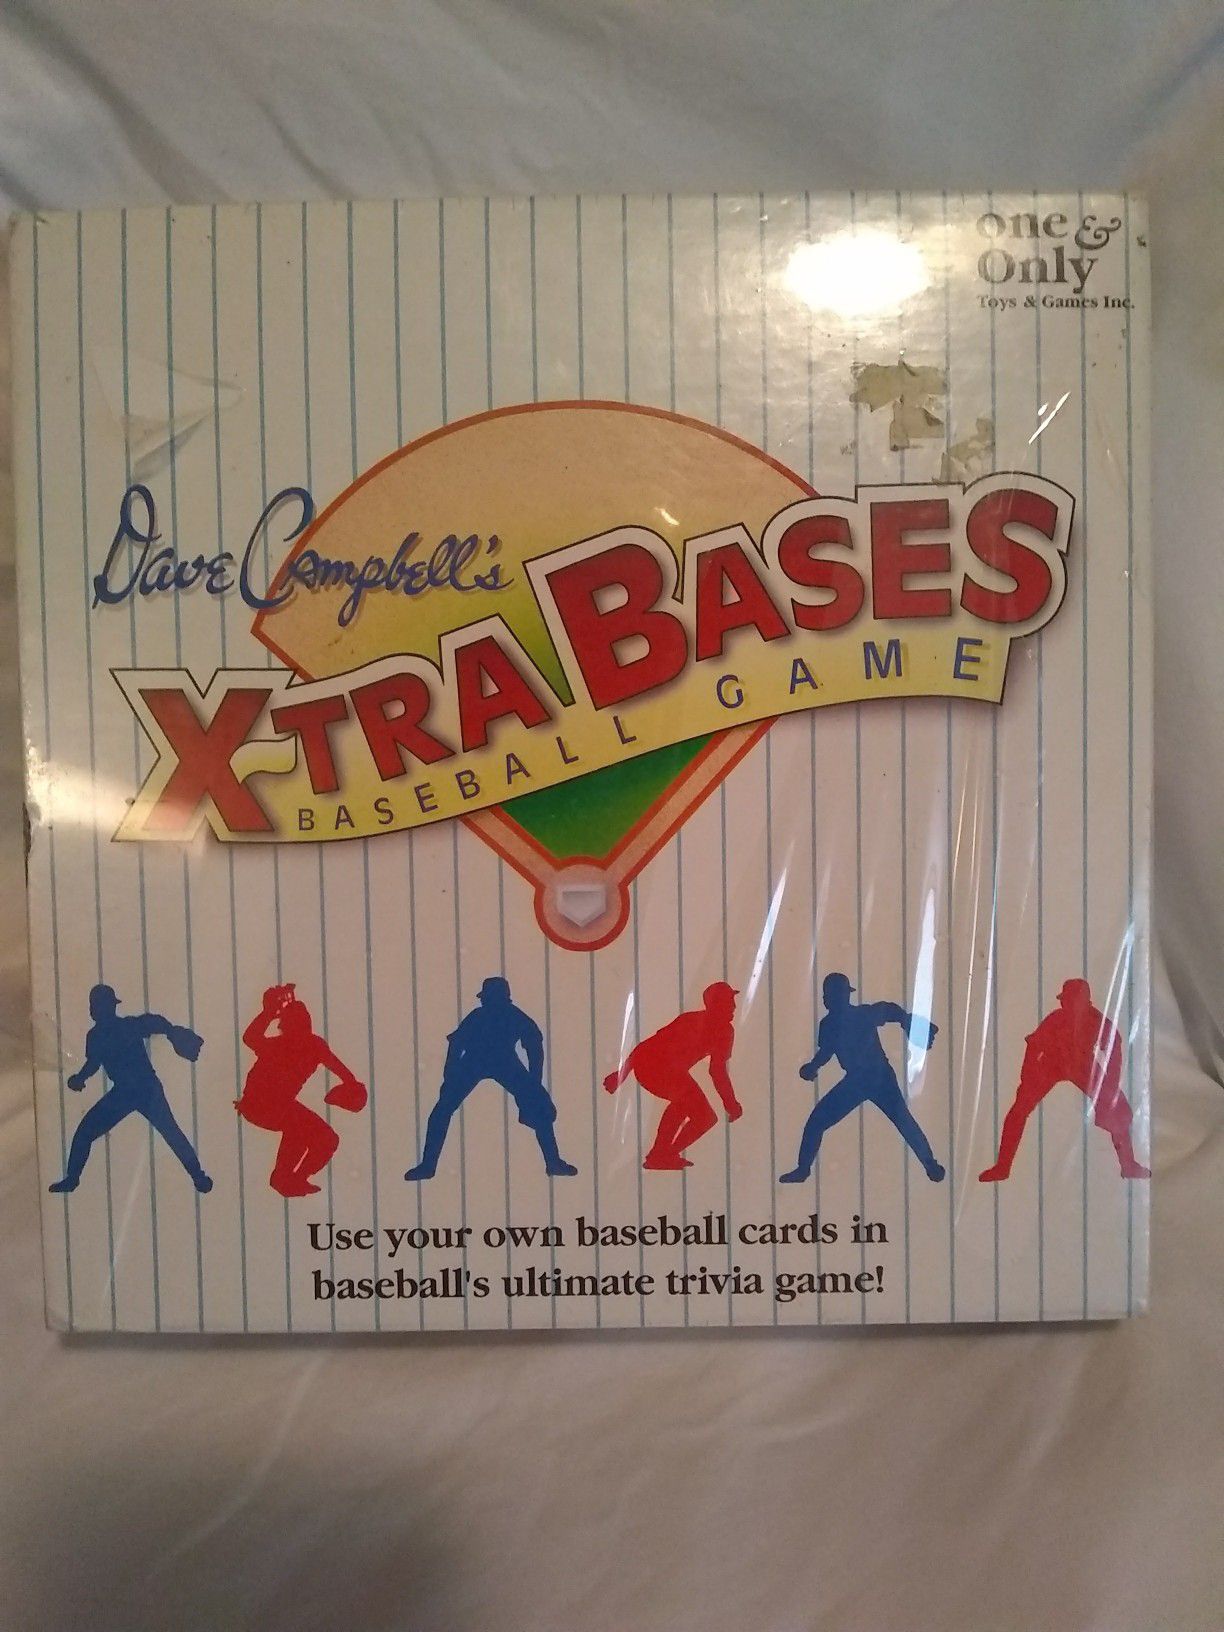 Dave Campbell's extra bases baseball game